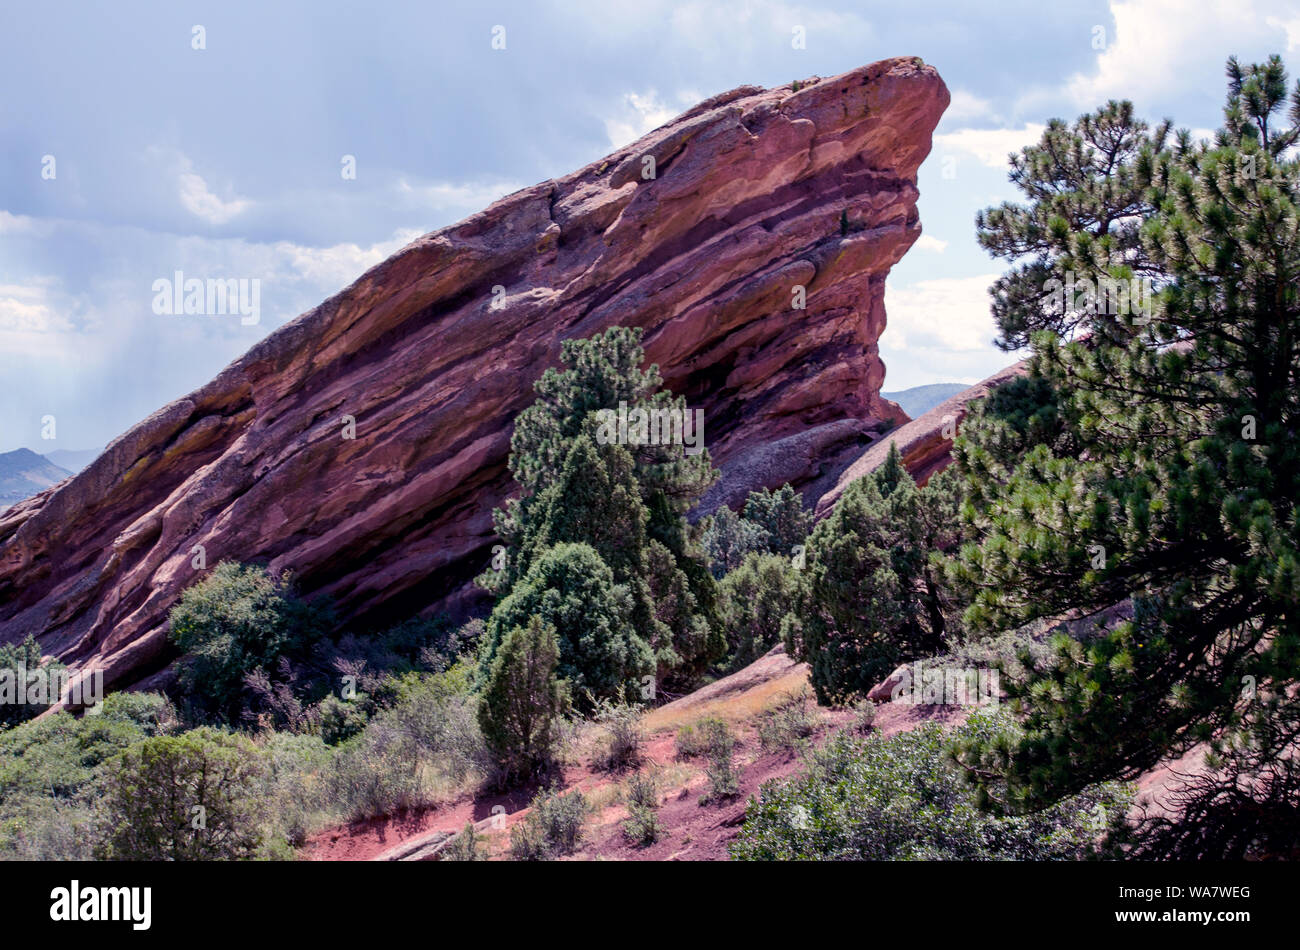 This beautiful landscape near Denver Colorado, can be found at the red rocks park and amphitheater, a breathtaking scenic venue with large sandstone b Stock Photo